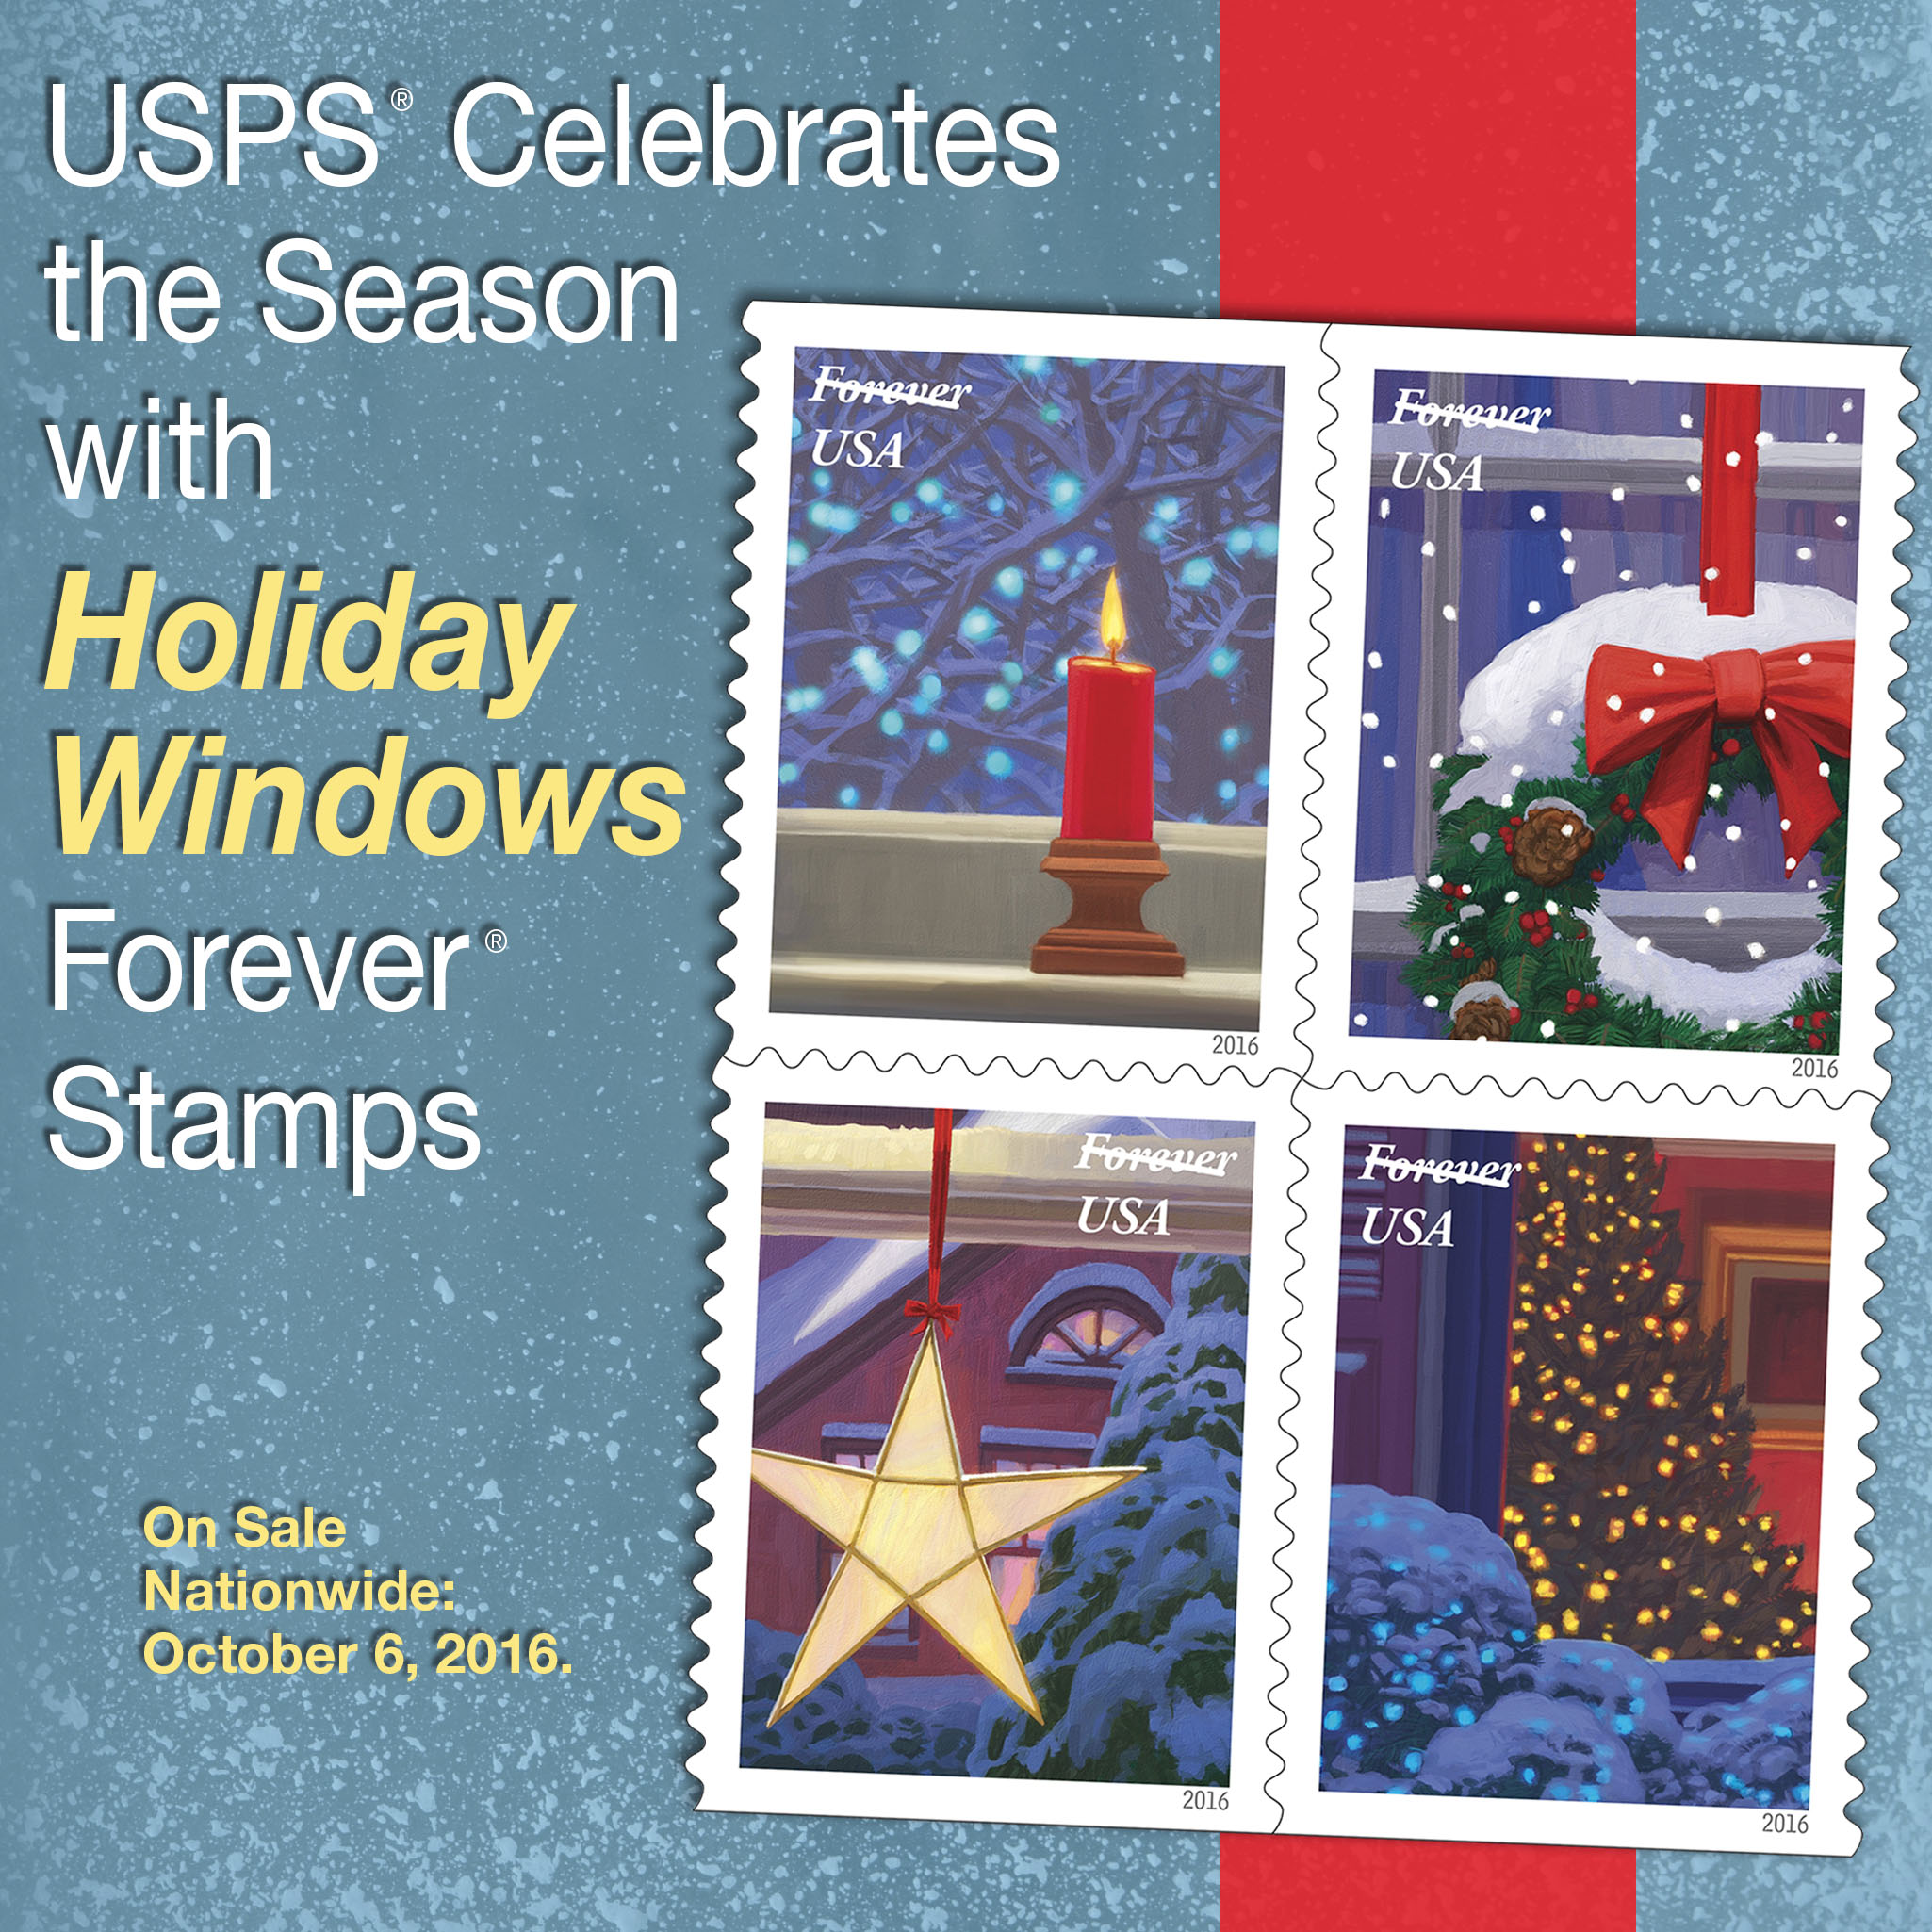 Celebrate Your Festivities With USPS Piñatas! Stamps - Newsroom - About.usps .com